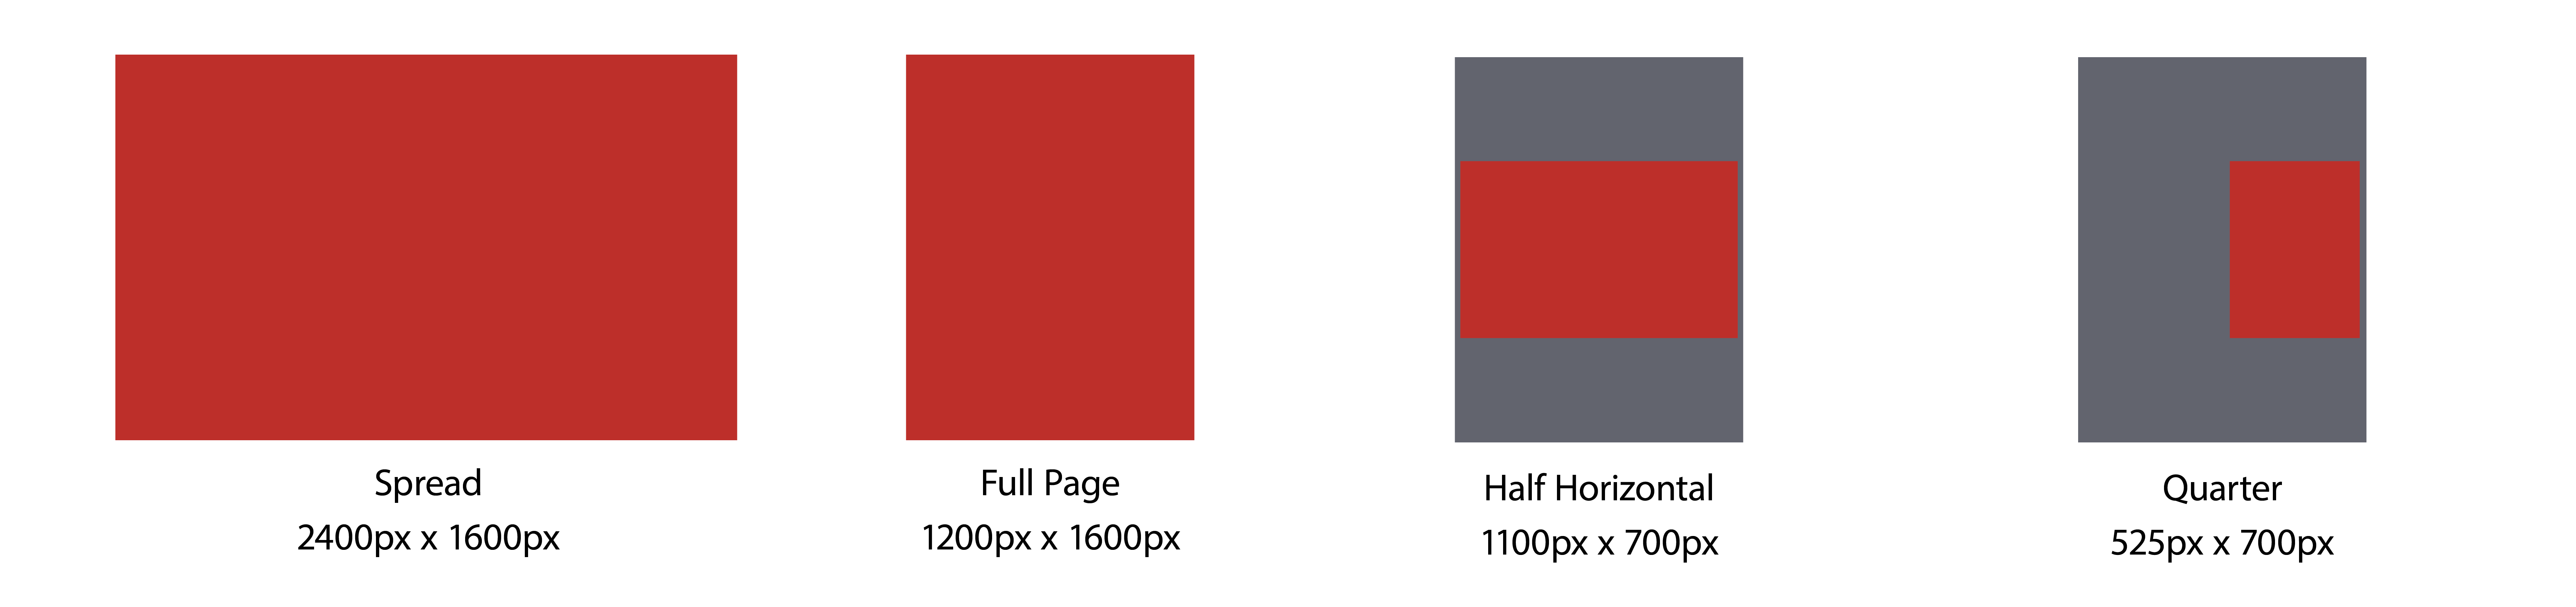 Examples of publication ad sizes.